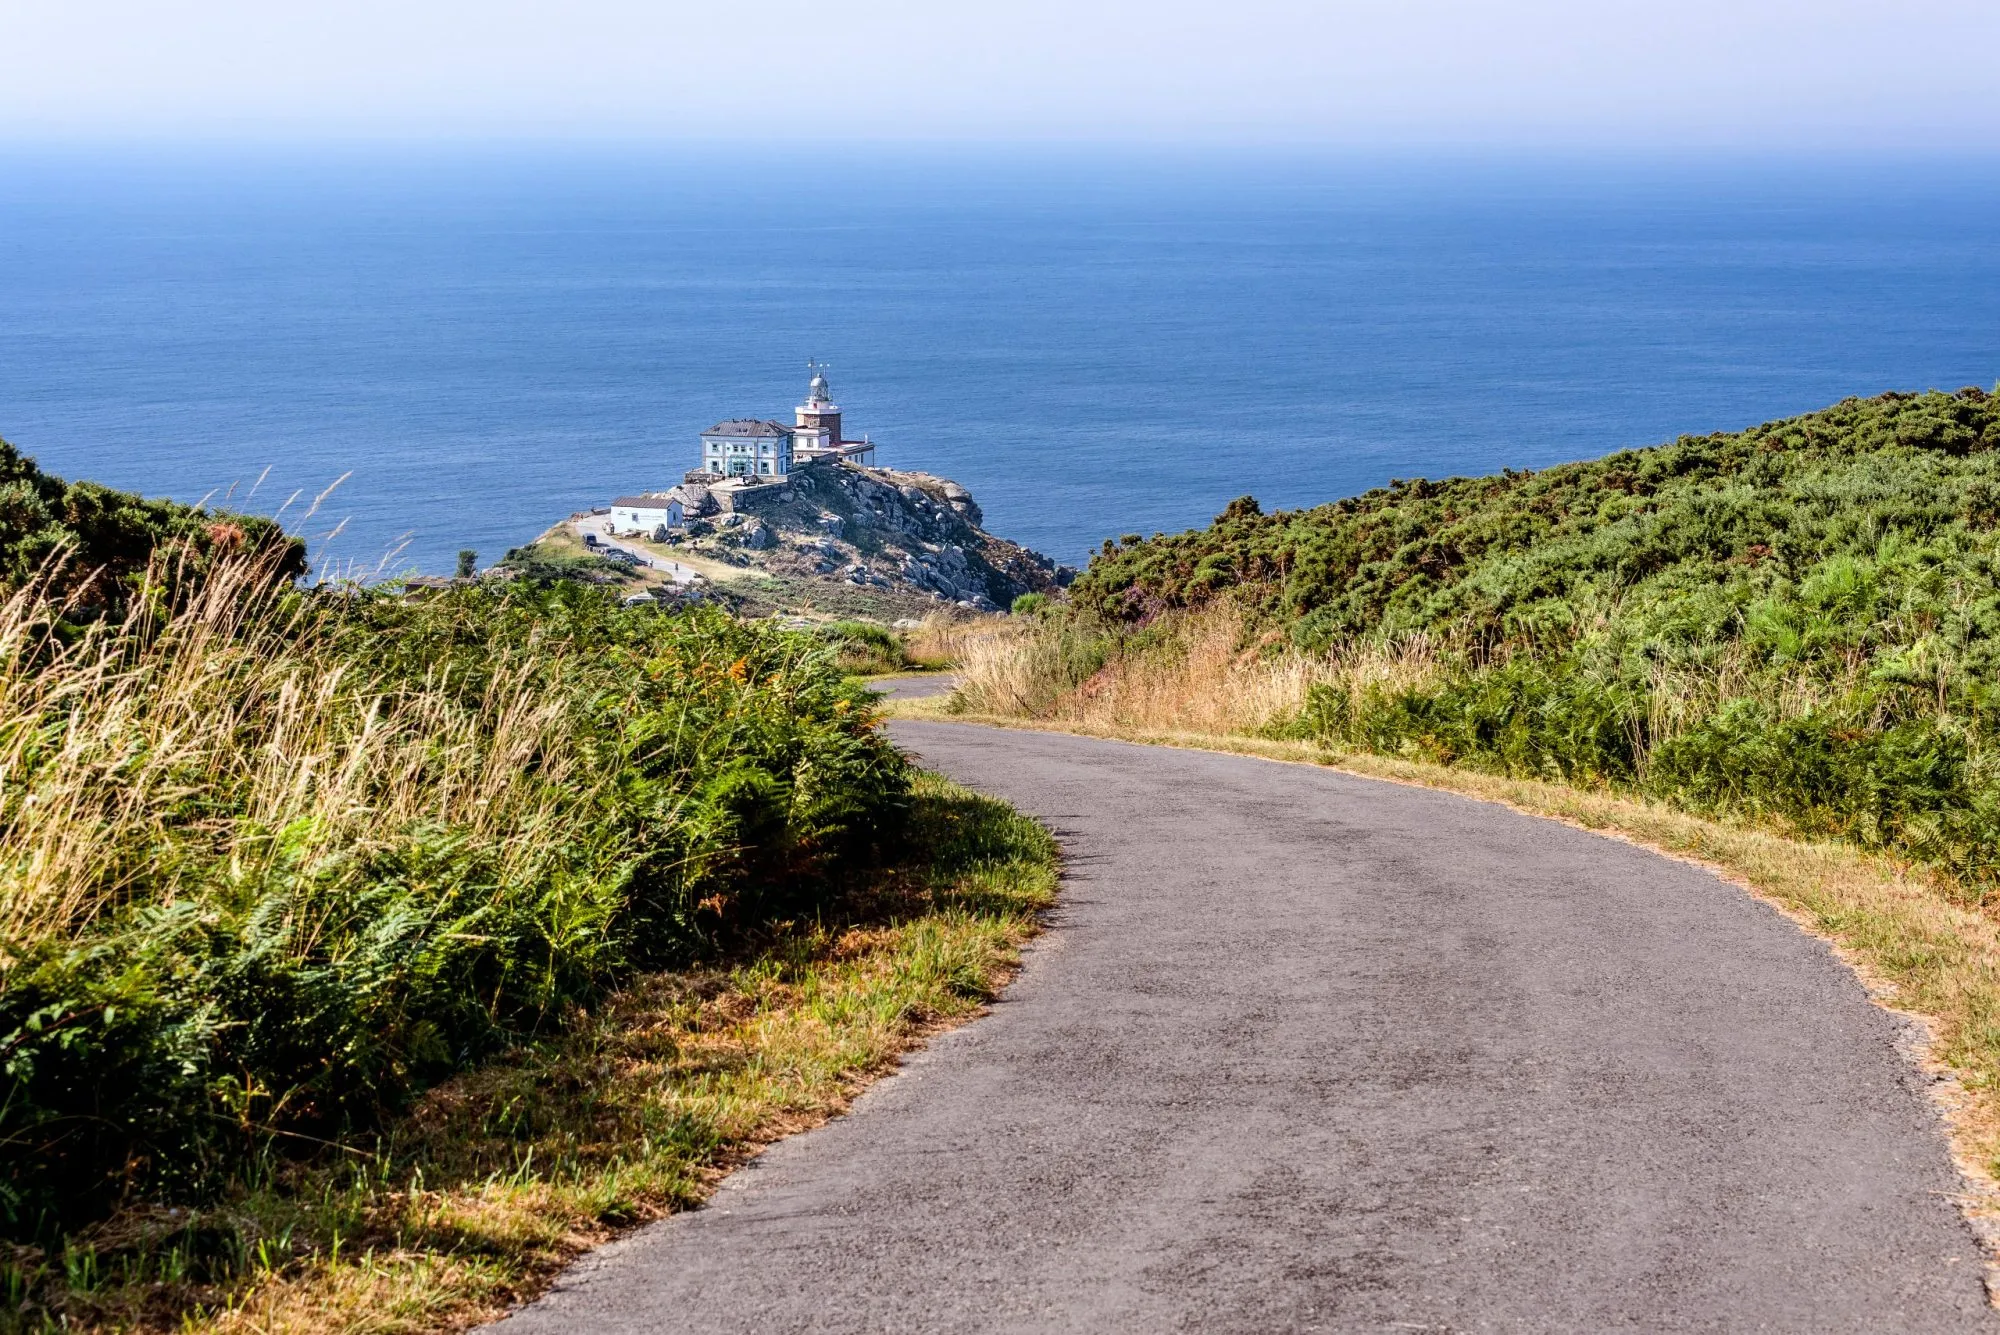 Spain, Finisterre: Famous lighthouse on rocky cliff with road, seascape, ocean sea, skyline and blue sky in the background. It is located on a rock-bound peninsula and was known as end of the world.